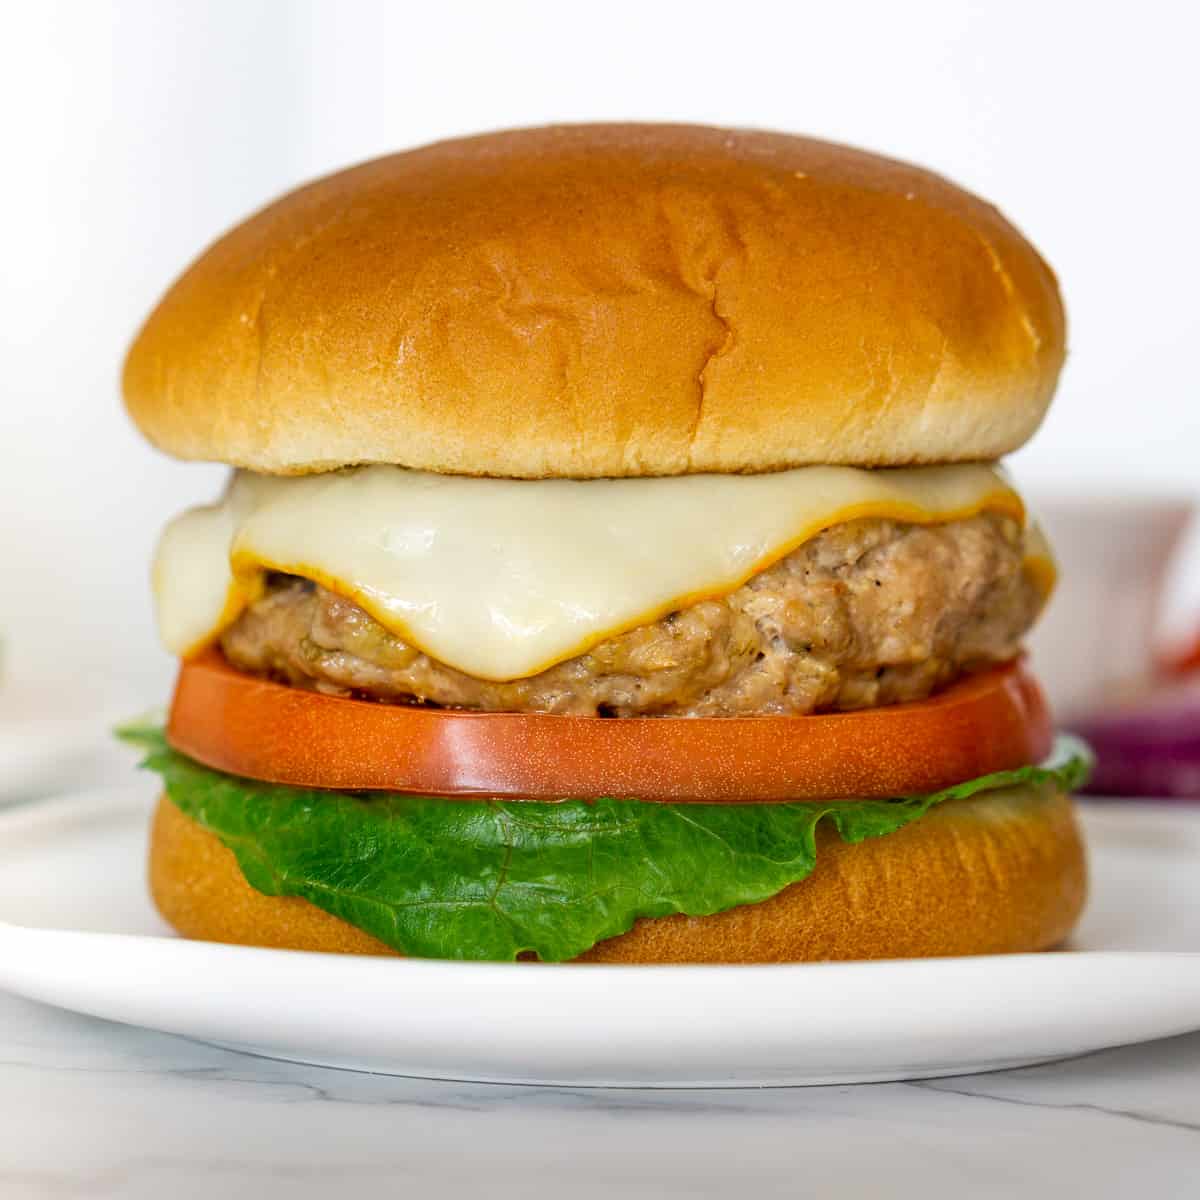 pork burger with cheese